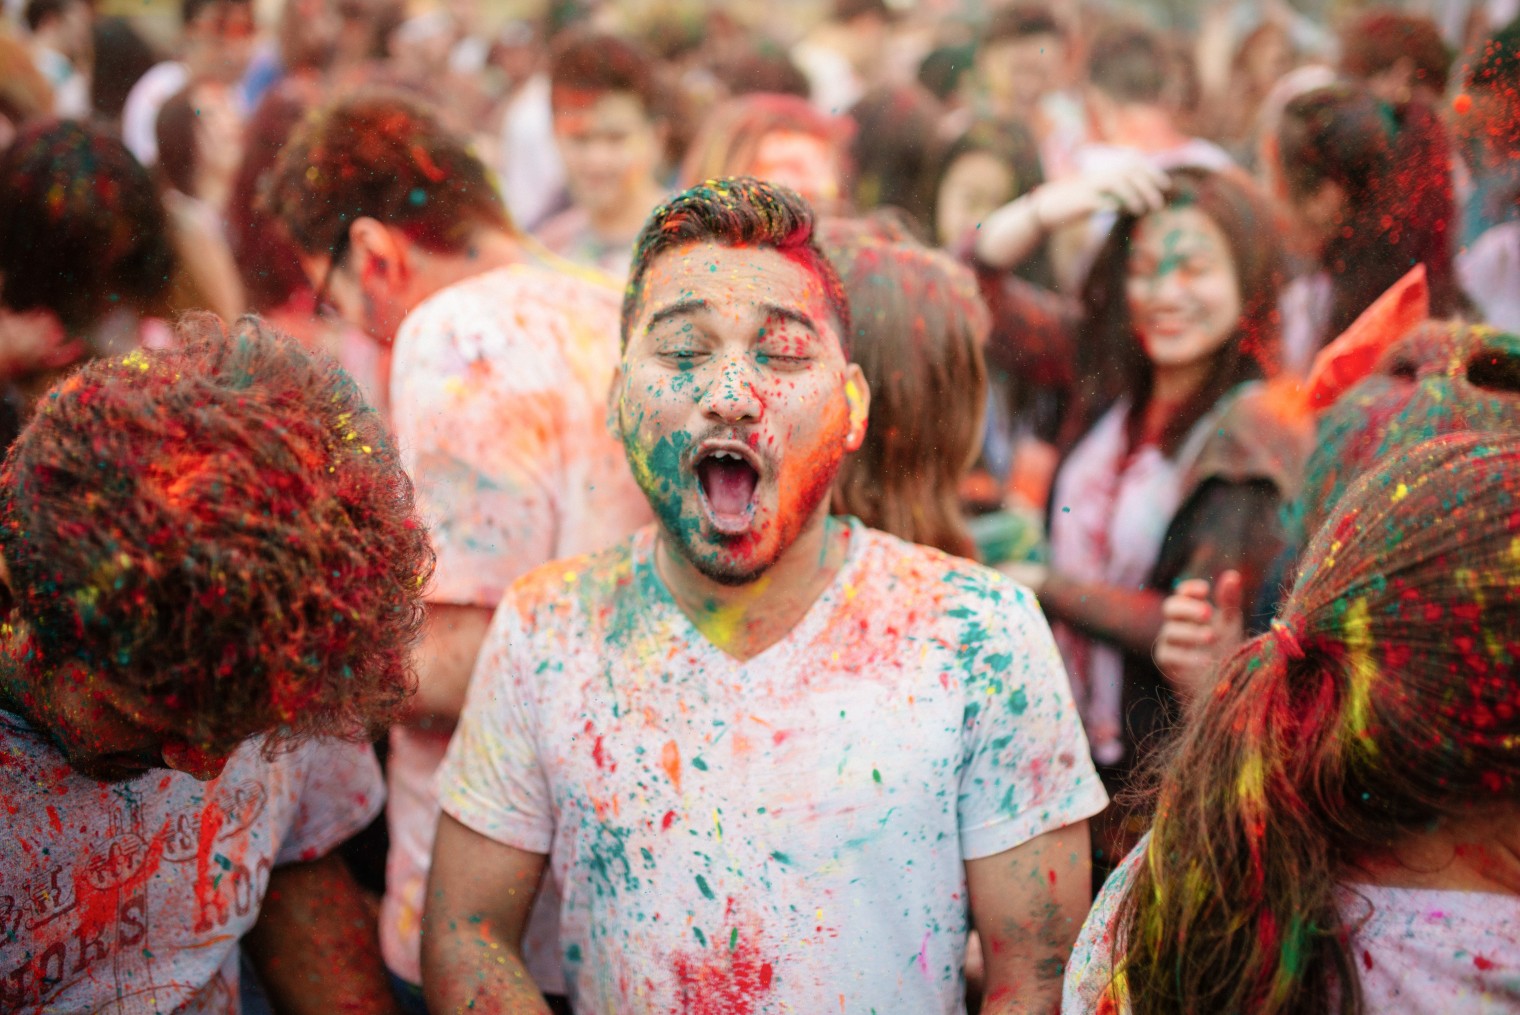 A crowd of students joyfully dance together covered in multi-coloured powder to celebrate Holi